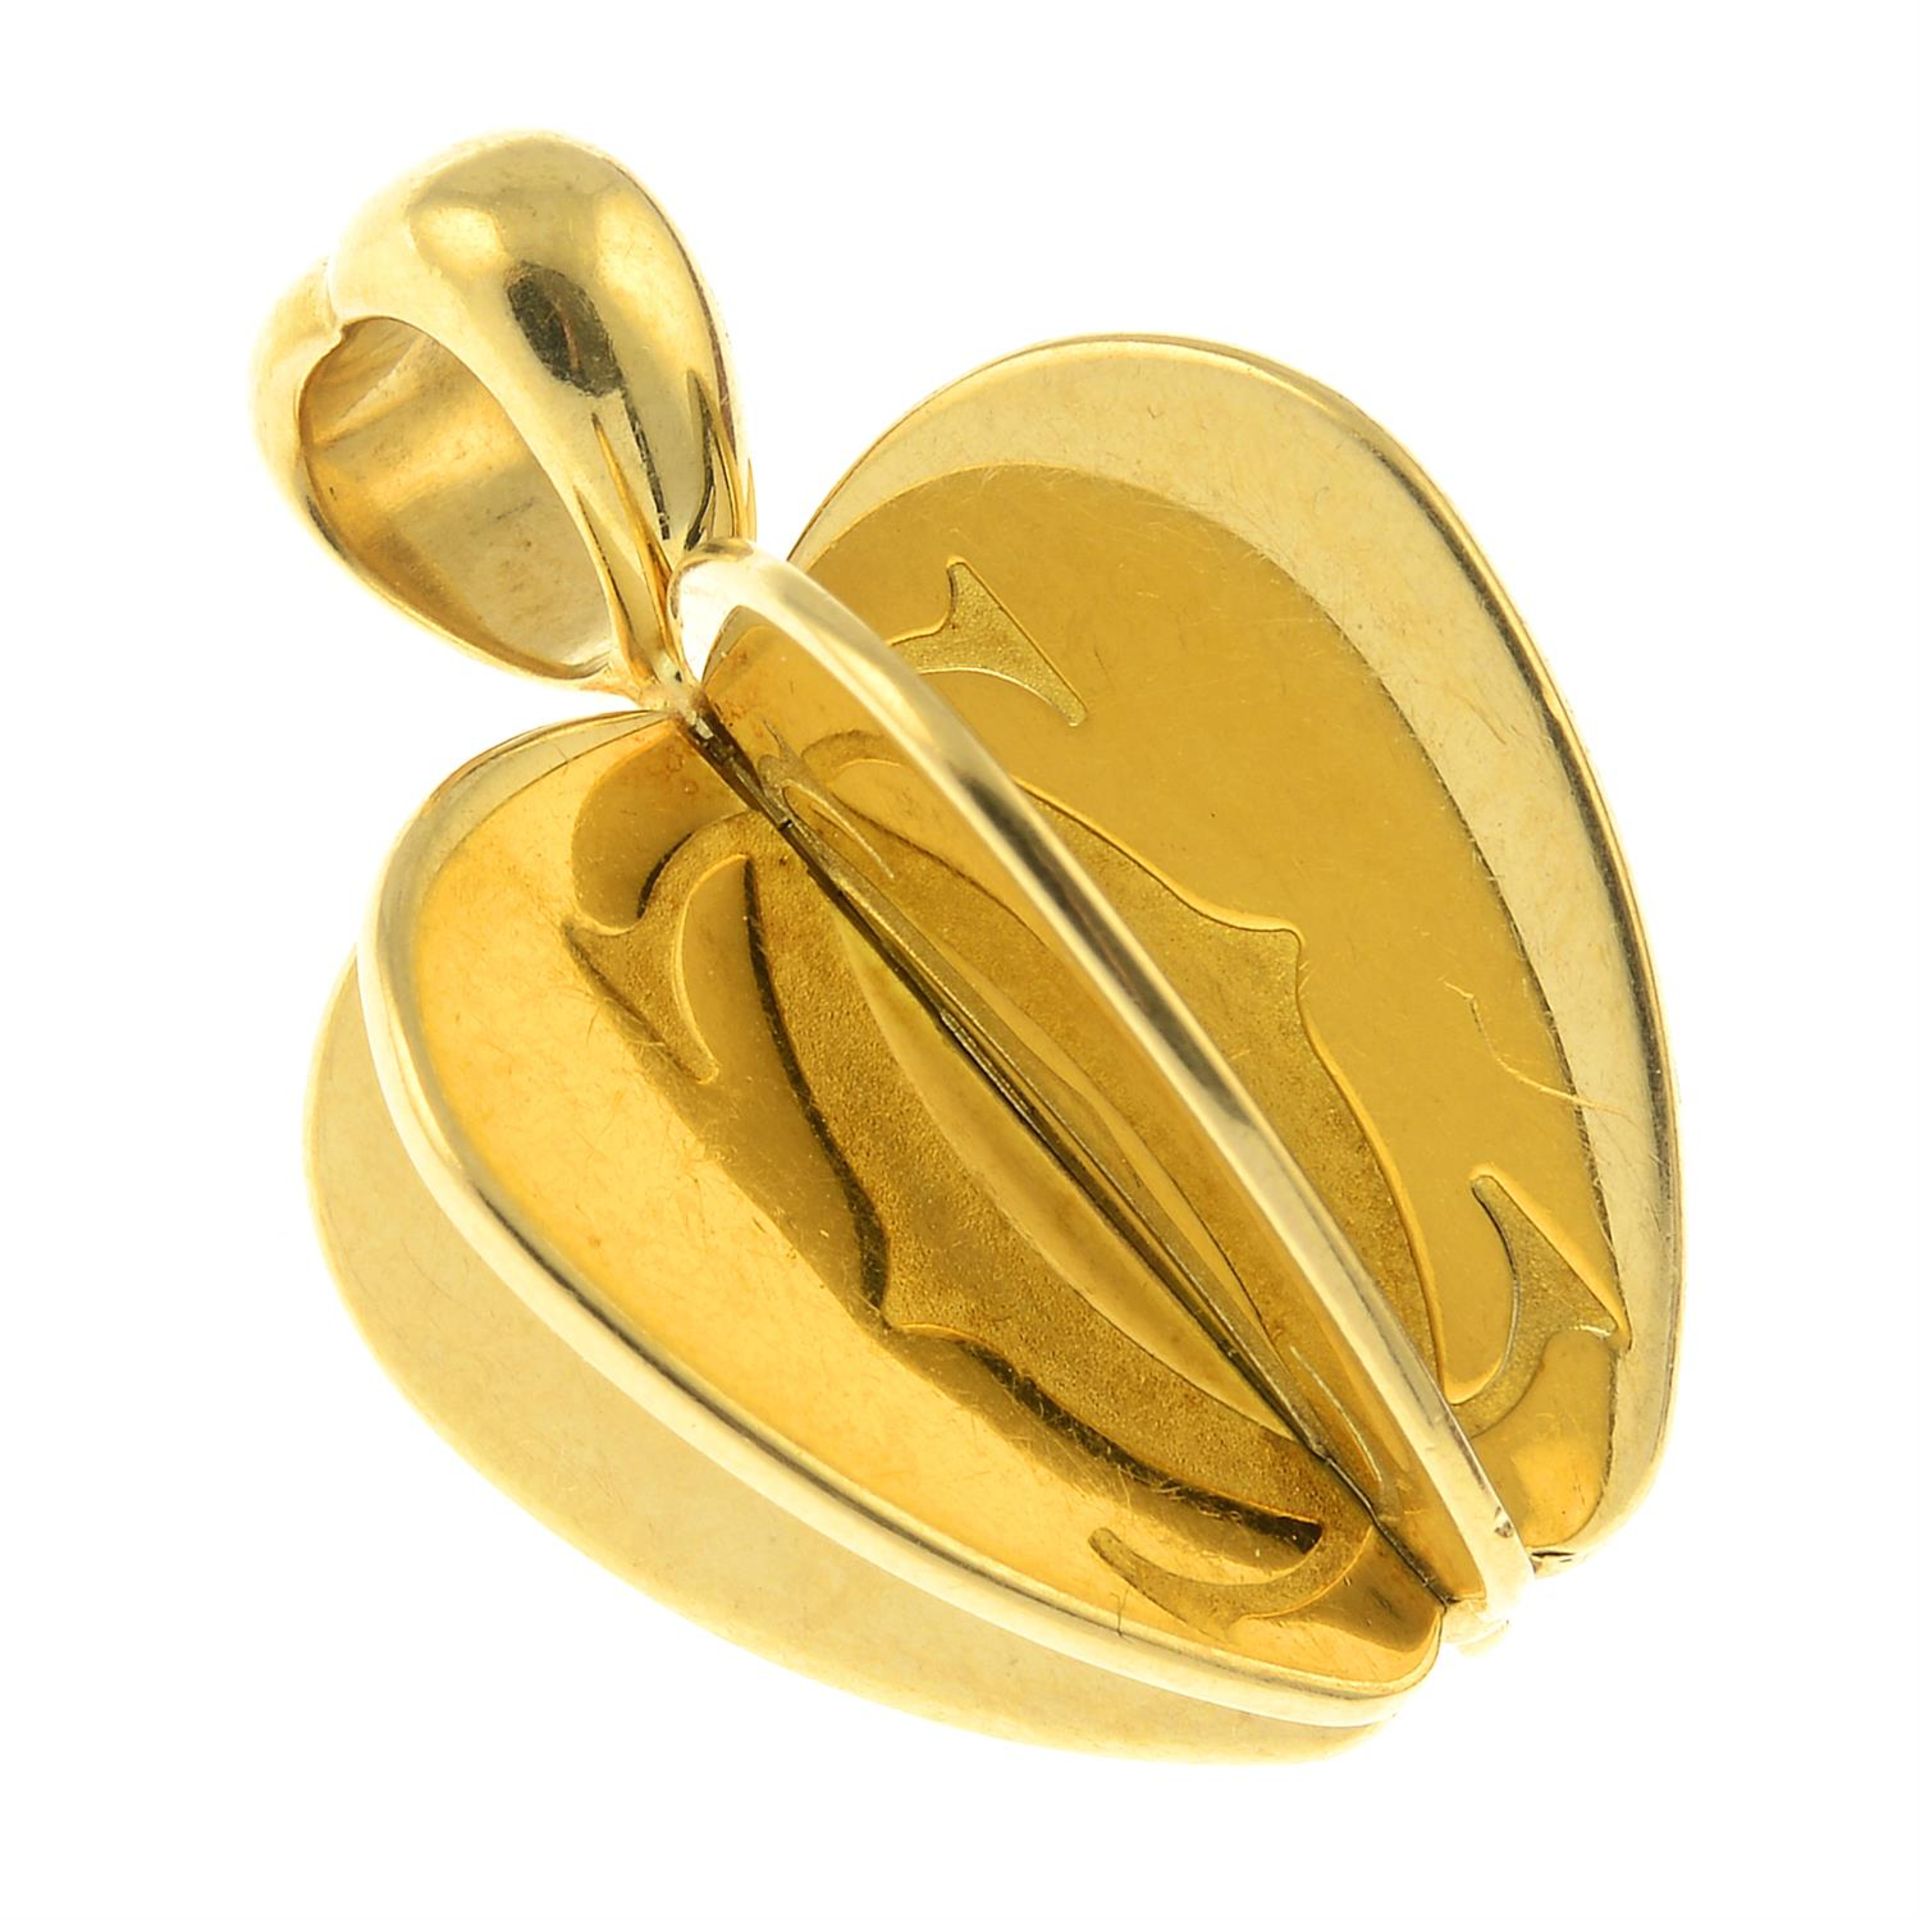 An Apple pendant, by Cartier. - Image 3 of 5